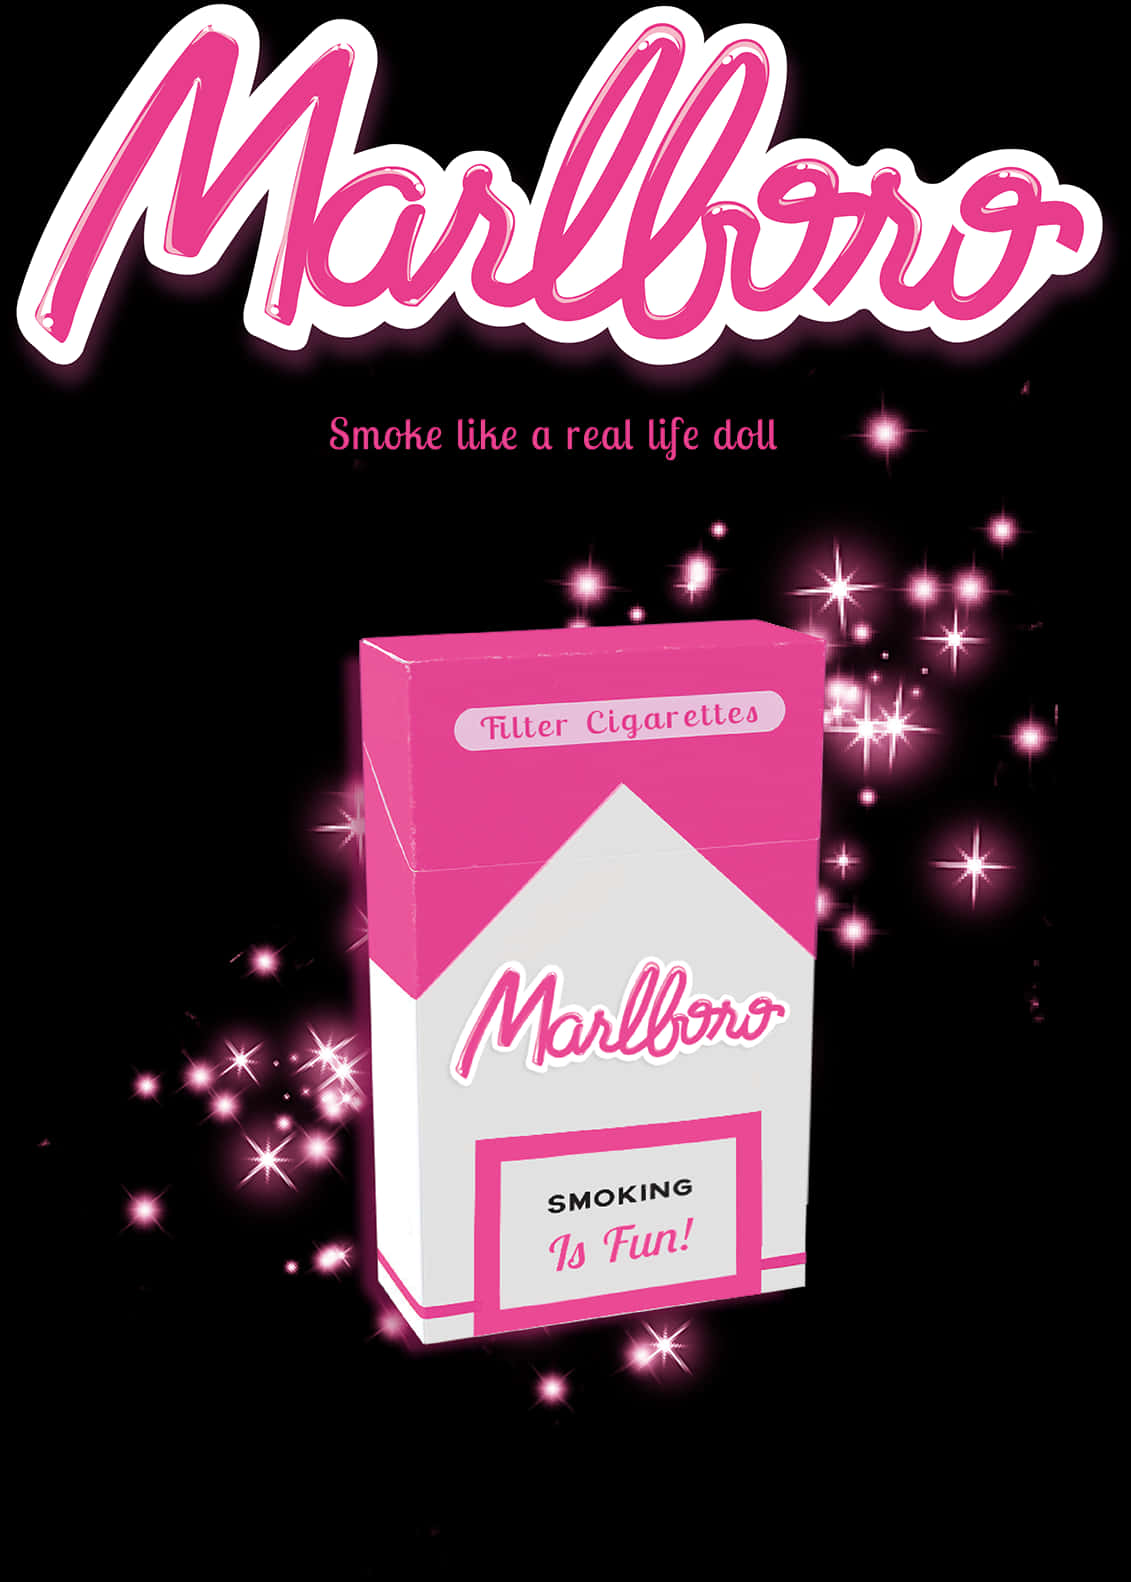 A Pink And White Pack Of Cigarettes